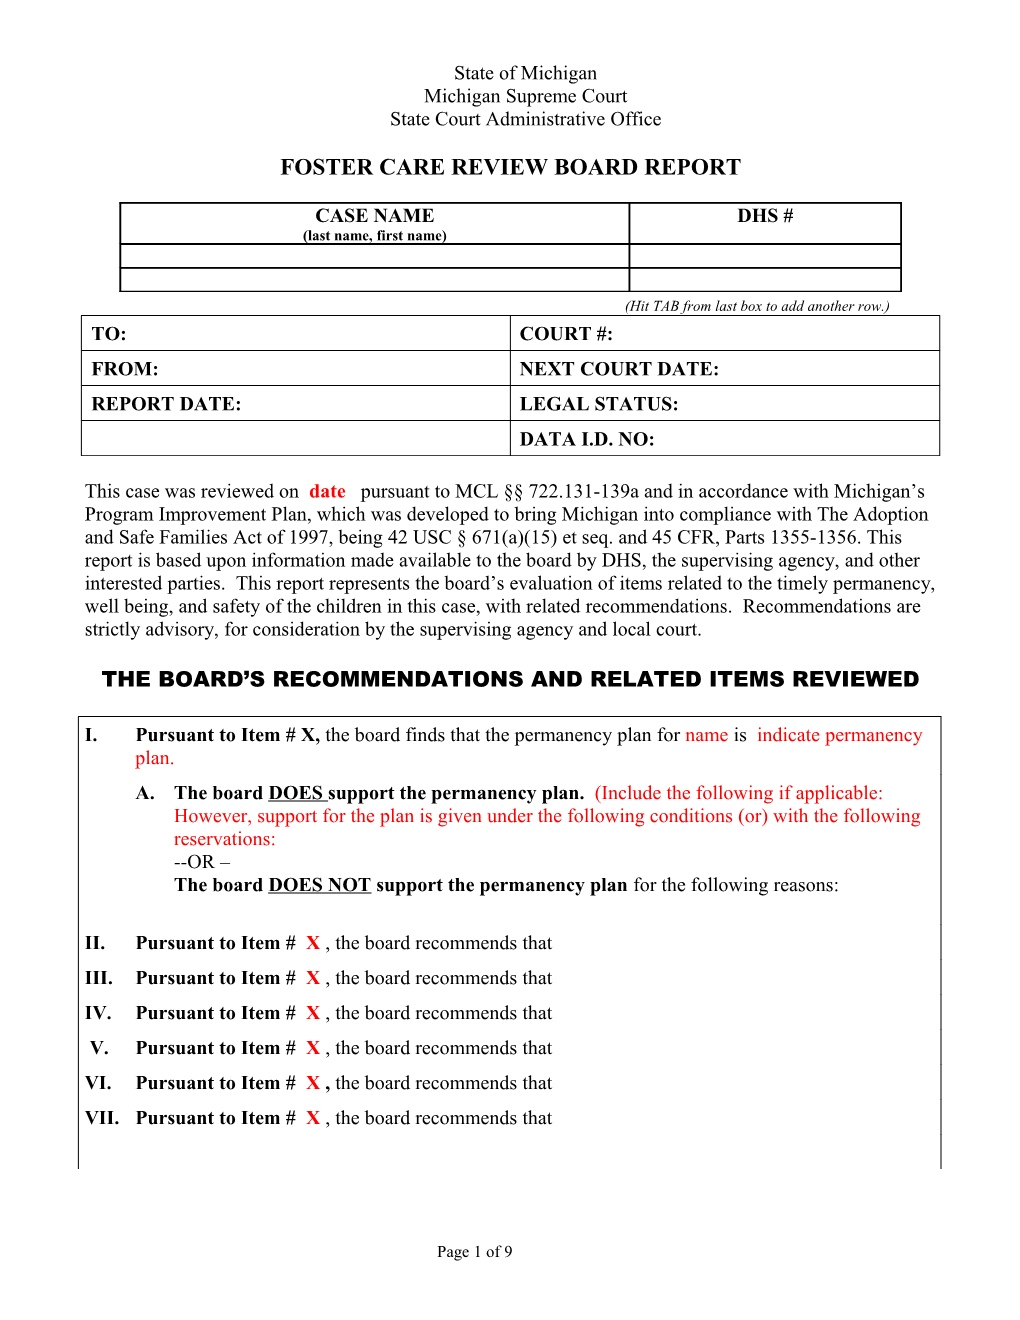 Foster Care Review Board Report